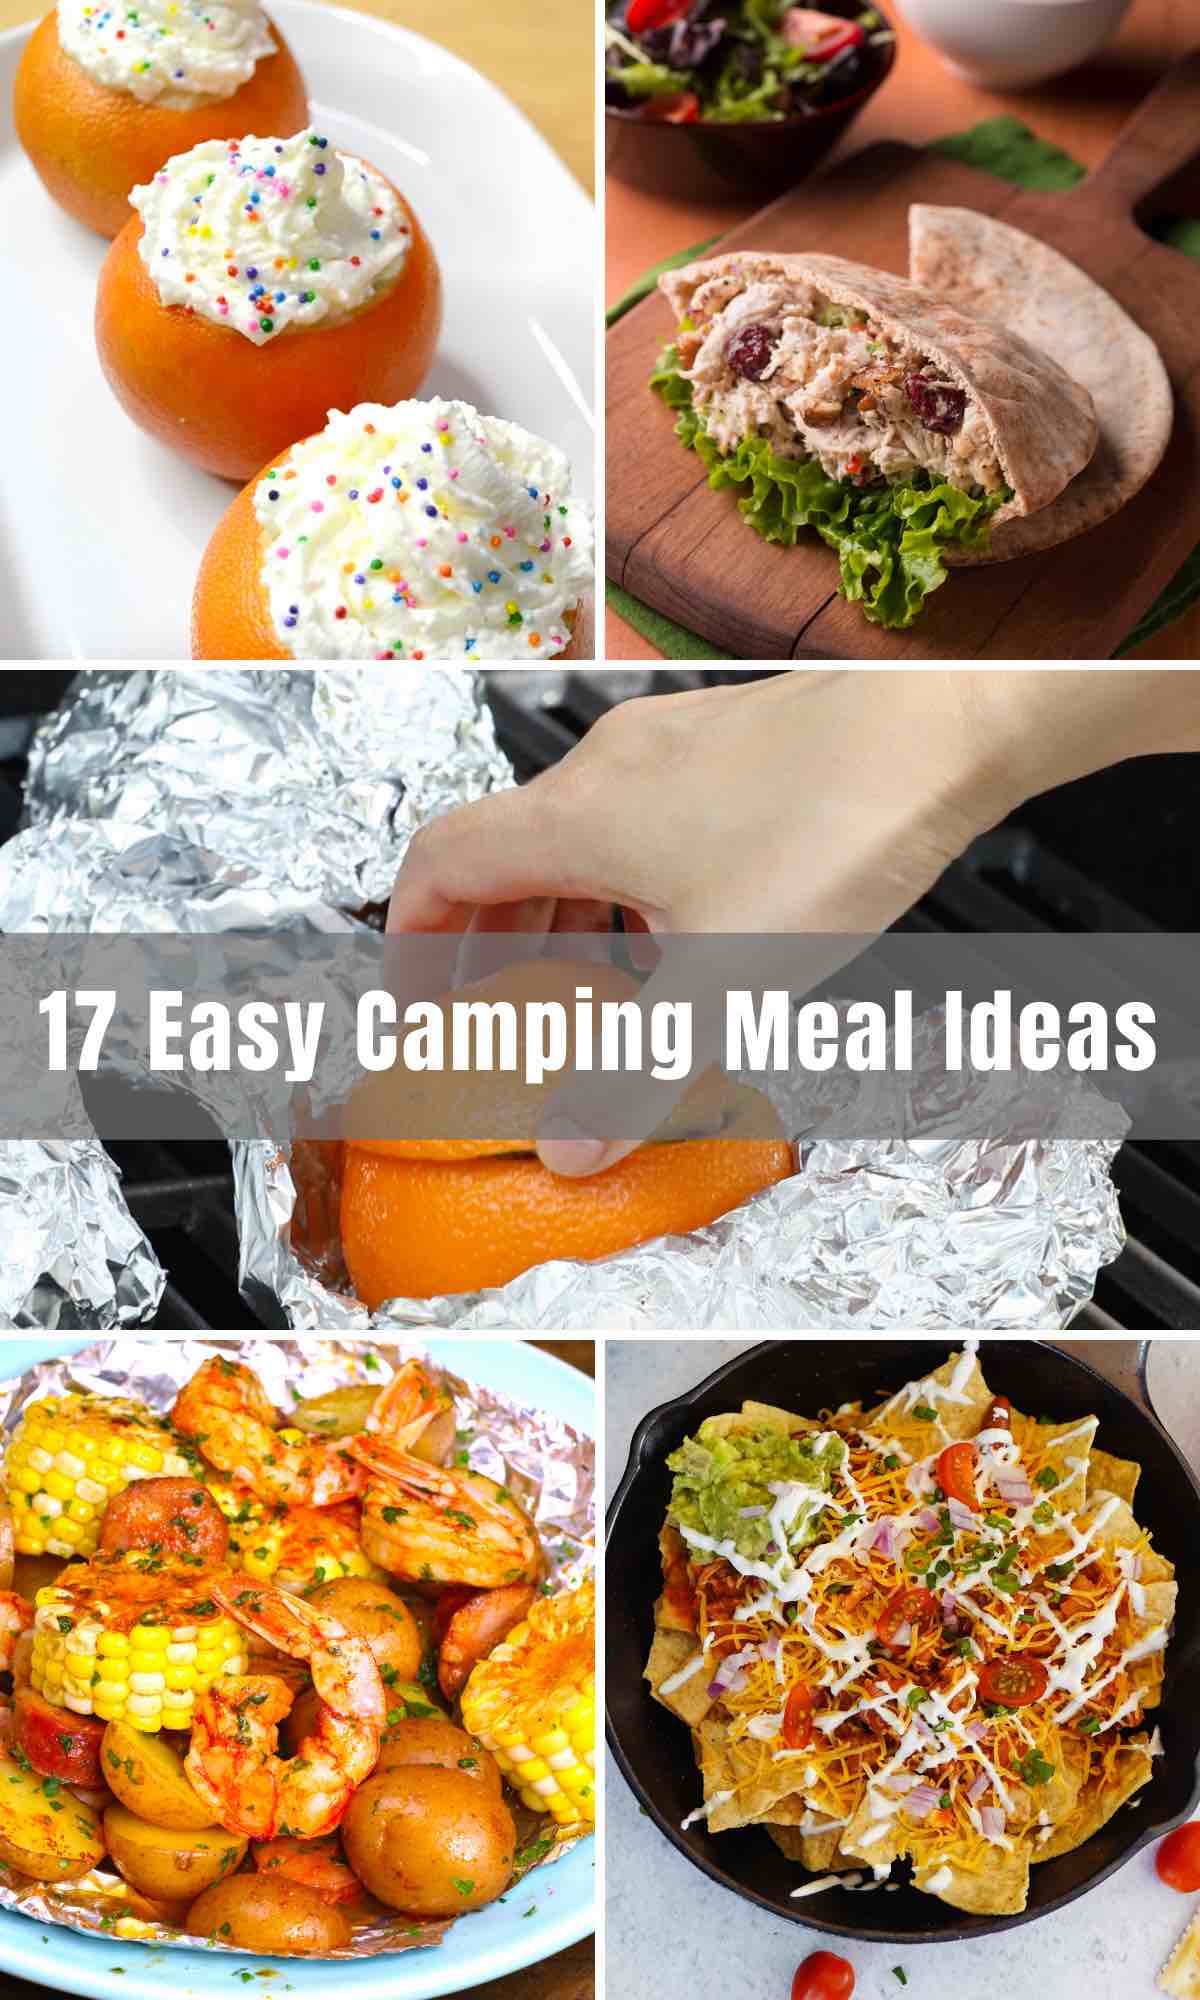 How to Reheat Food While Camping: Tips and Tricks - Gear Guide Pro